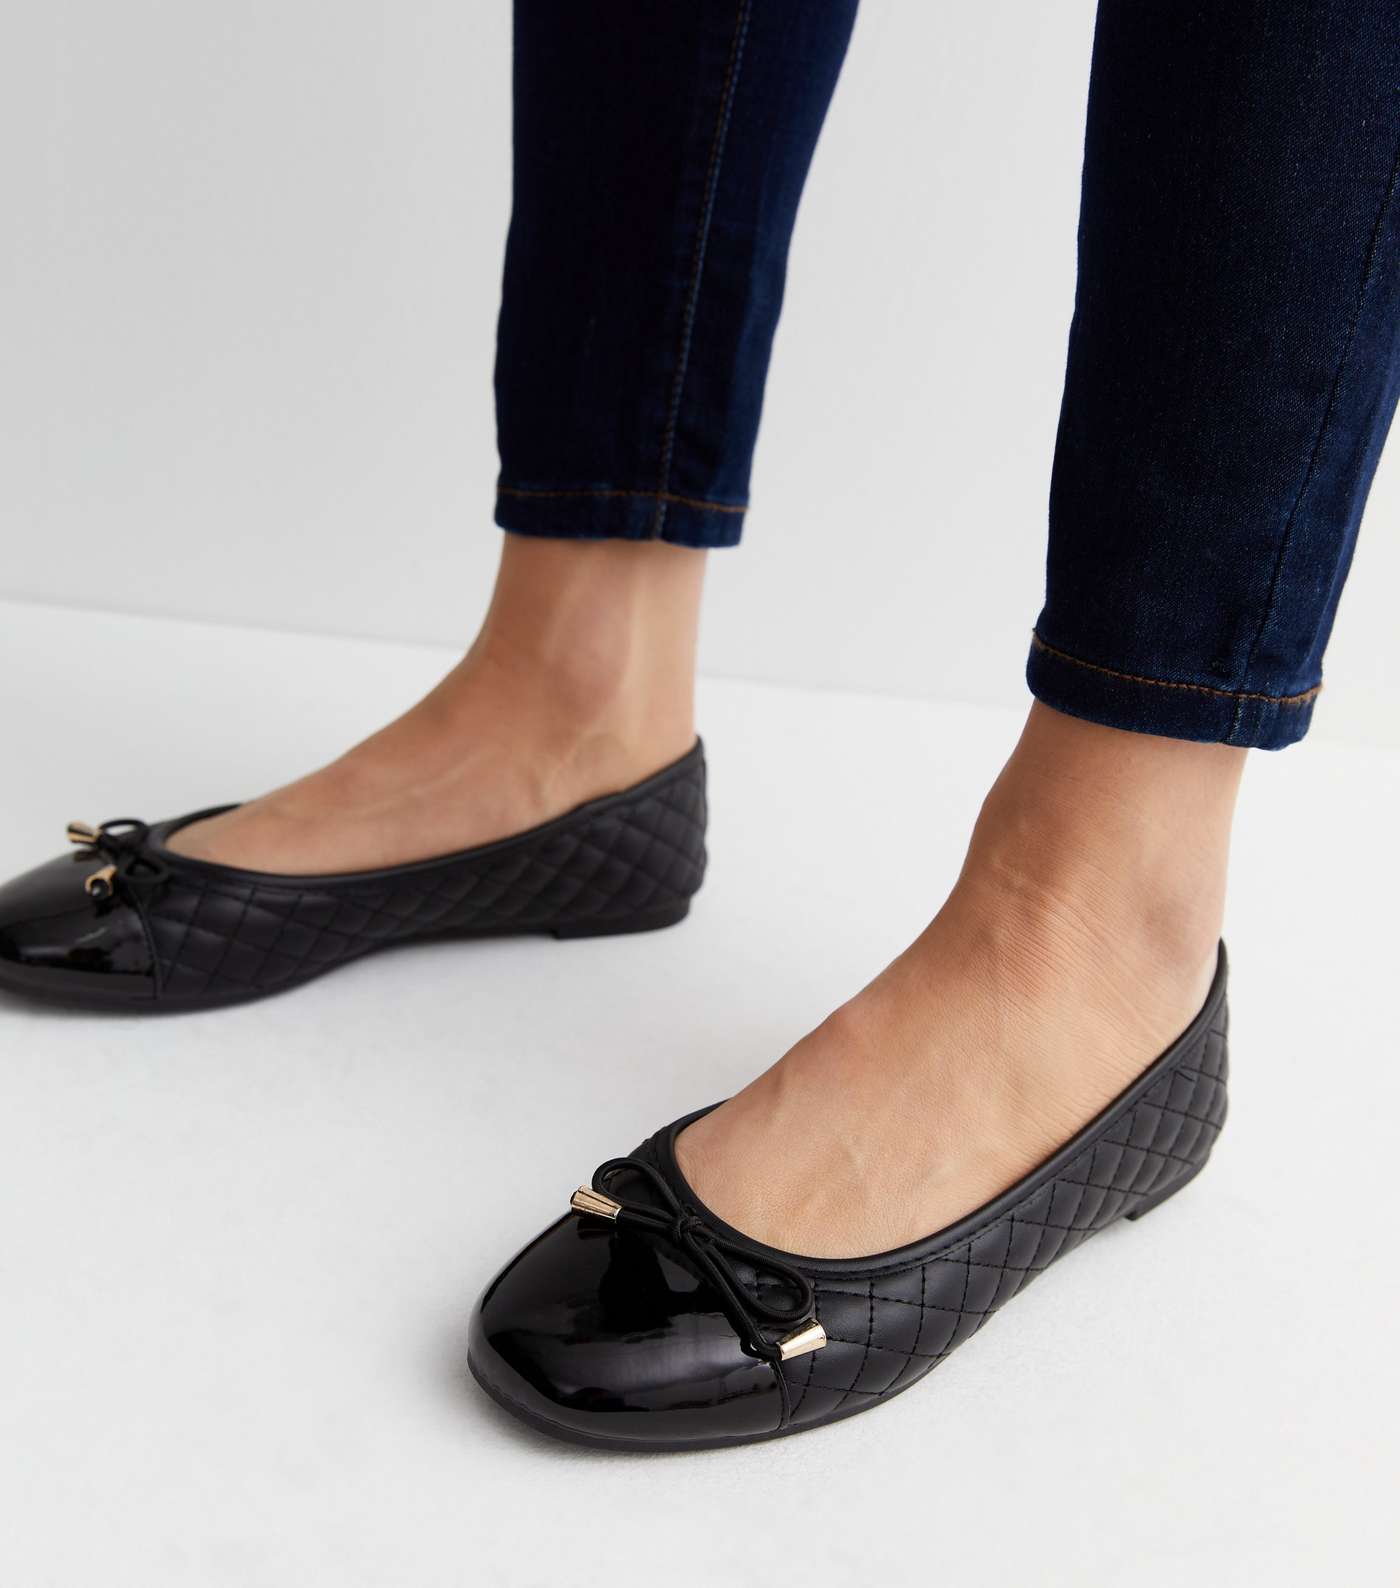 Black Quilted Bow Ballet Pumps Image 2